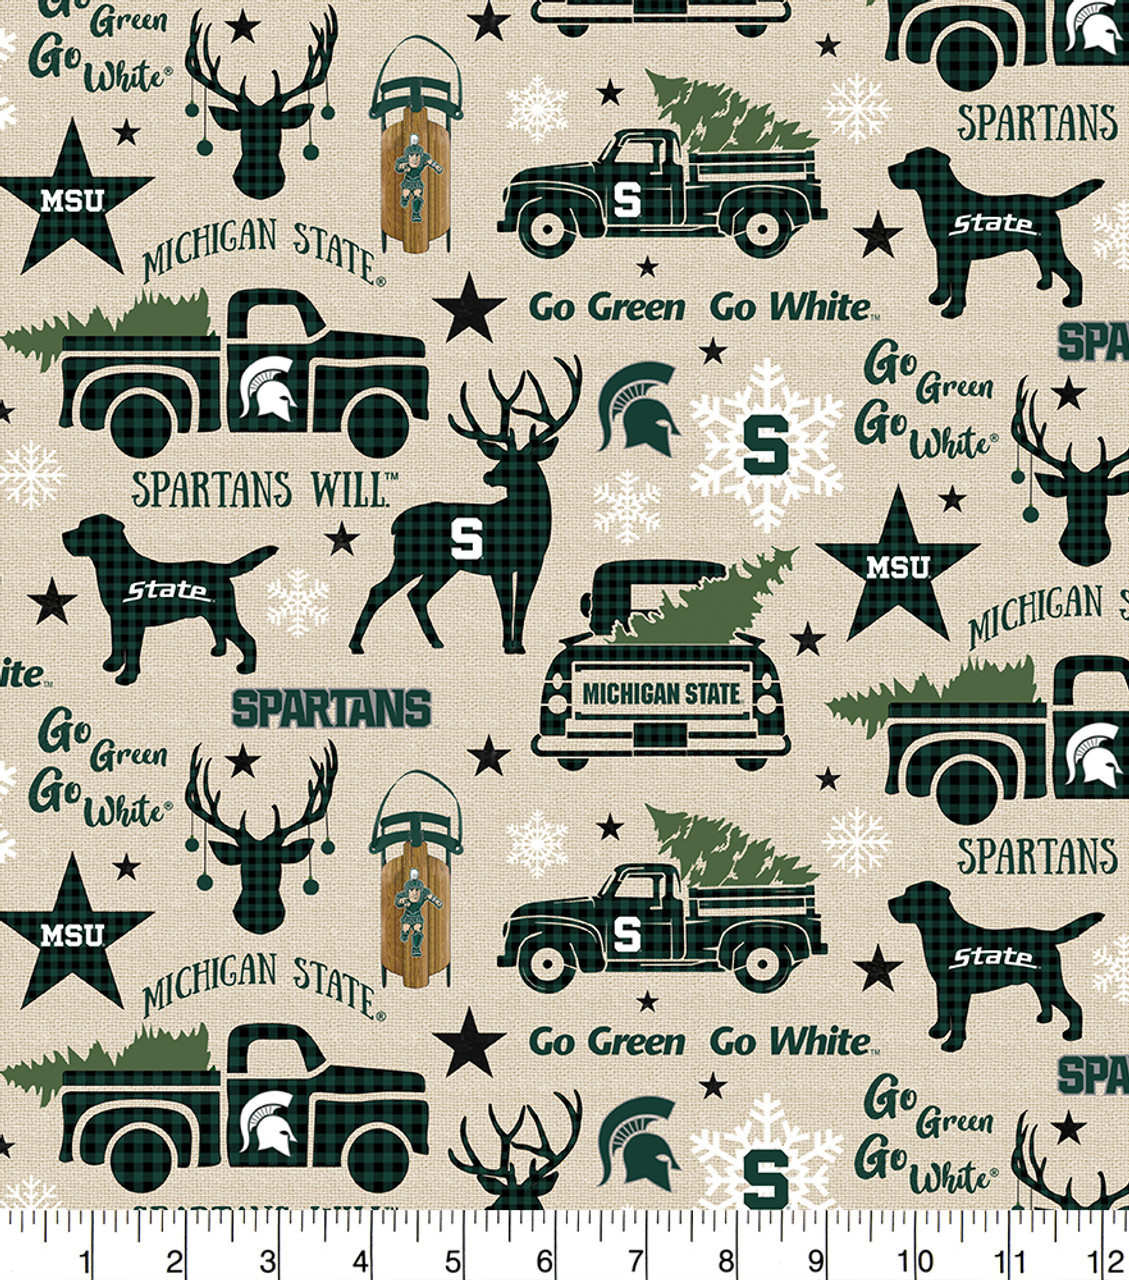 Michigan State University Spartans Cotton Fabric with Christmas Print and Matching Solid Cotton Fabrics